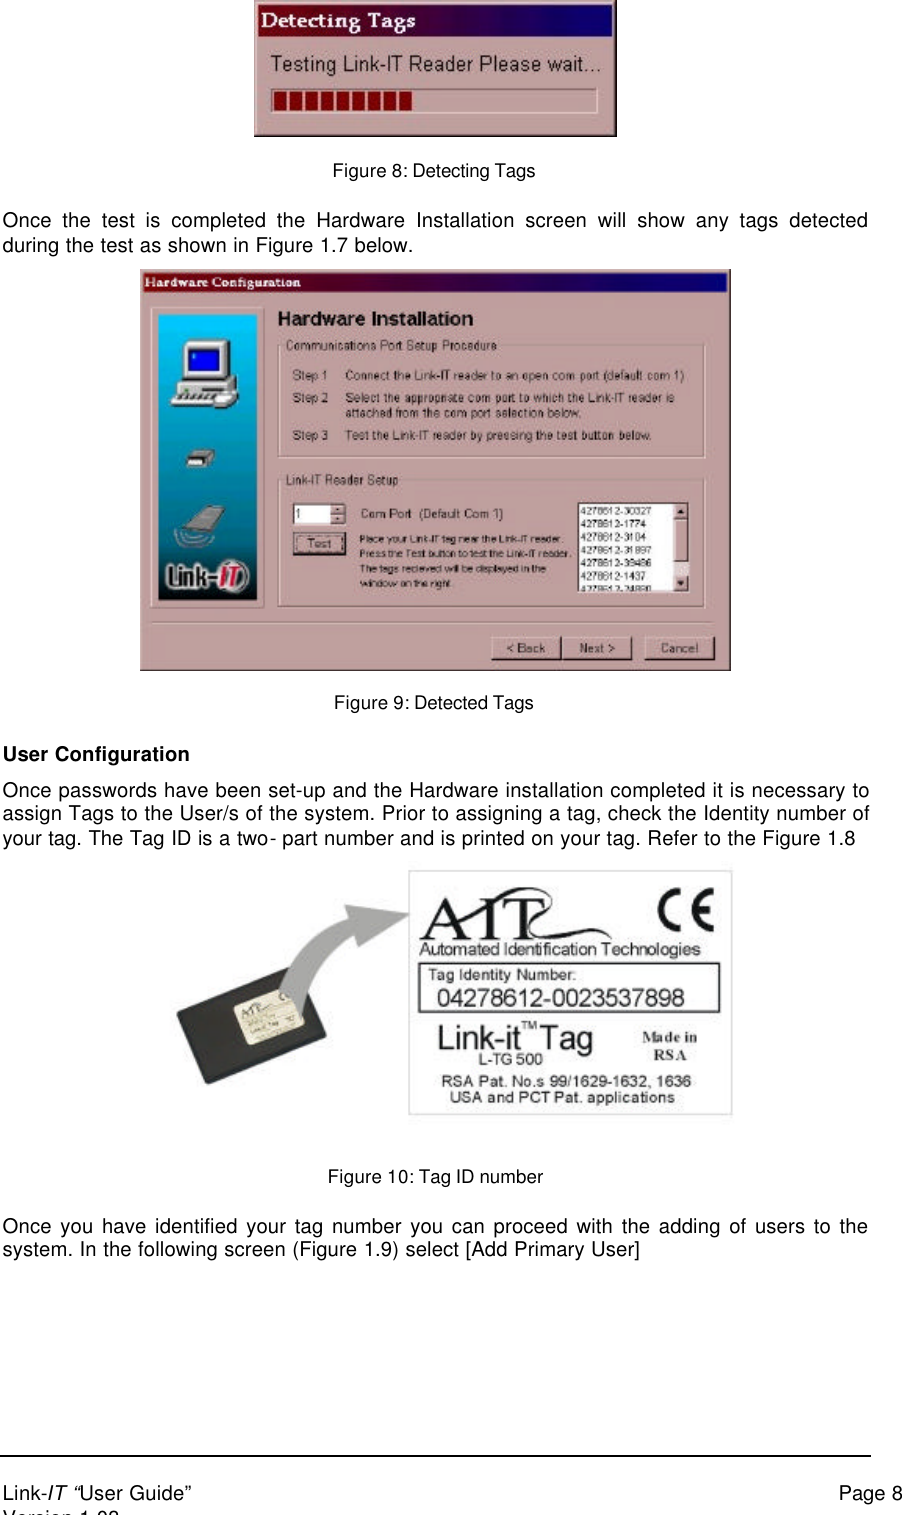 Link-IT “User Guide” Page 8Version 1.03Figure 8: Detecting TagsOnce the test is completed the Hardware Installation screen will show any tags detectedduring the test as shown in Figure 1.7 below.Figure 9: Detected TagsUser ConfigurationOnce passwords have been set-up and the Hardware installation completed it is necessary toassign Tags to the User/s of the system. Prior to assigning a tag, check the Identity number ofyour tag. The Tag ID is a two- part number and is printed on your tag. Refer to the Figure 1.8Figure 10: Tag ID numberOnce you have identified your tag number you can proceed with the adding of users to thesystem. In the following screen (Figure 1.9) select [Add Primary User]